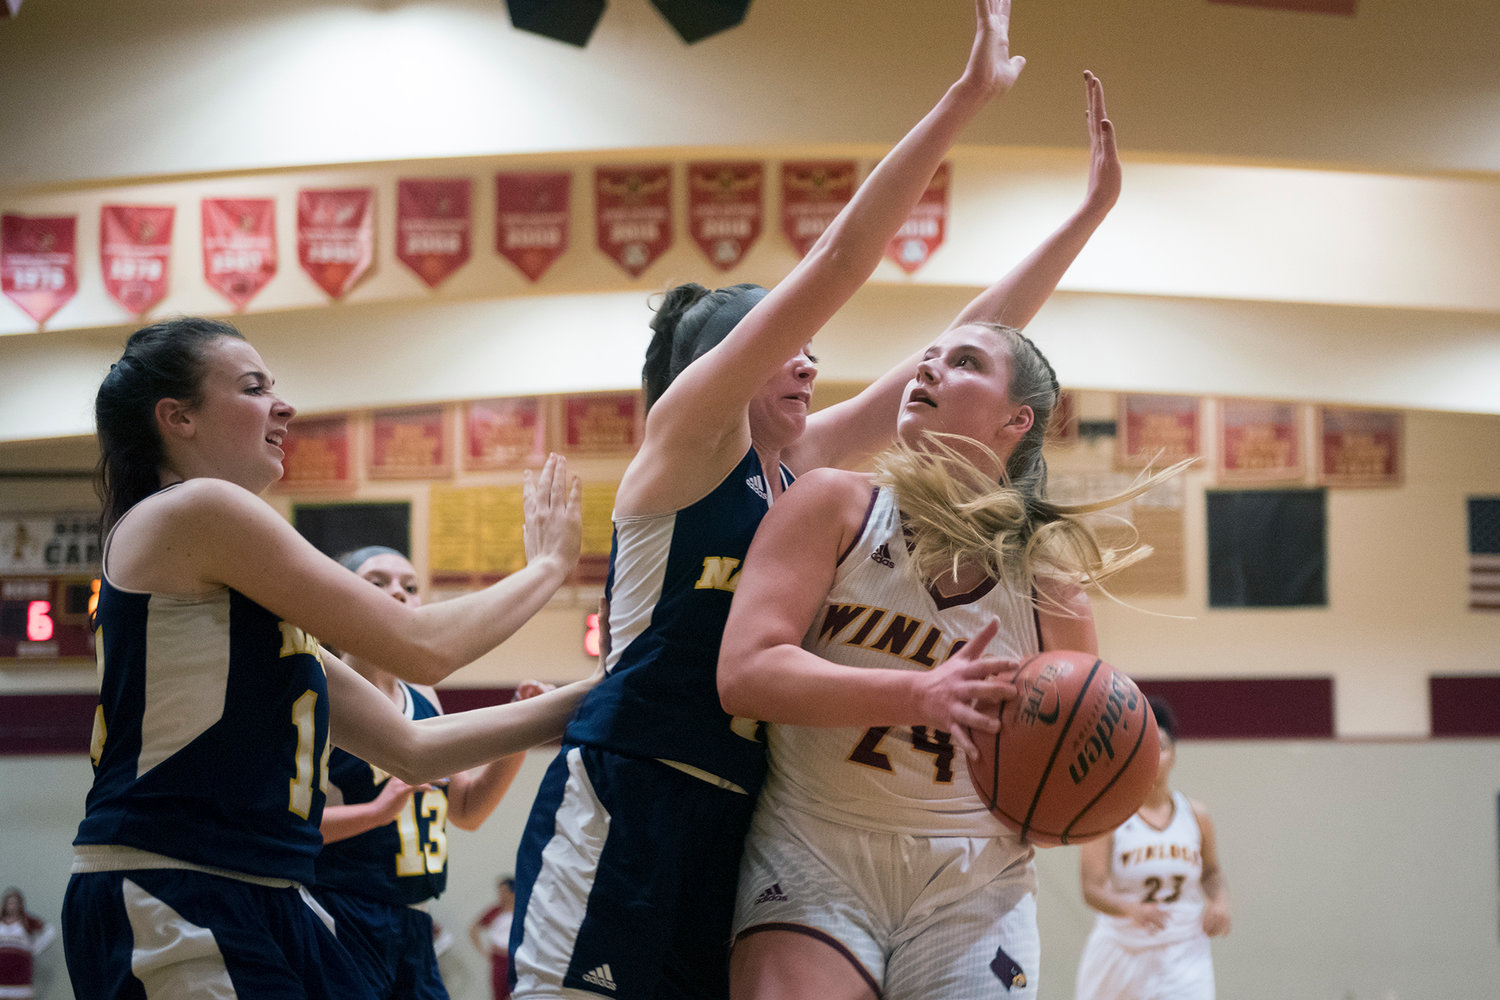 Images from a non-league girls basketball game between Winlock and Naselle at Winlock High School on Friday, Dec. 6, 2019.